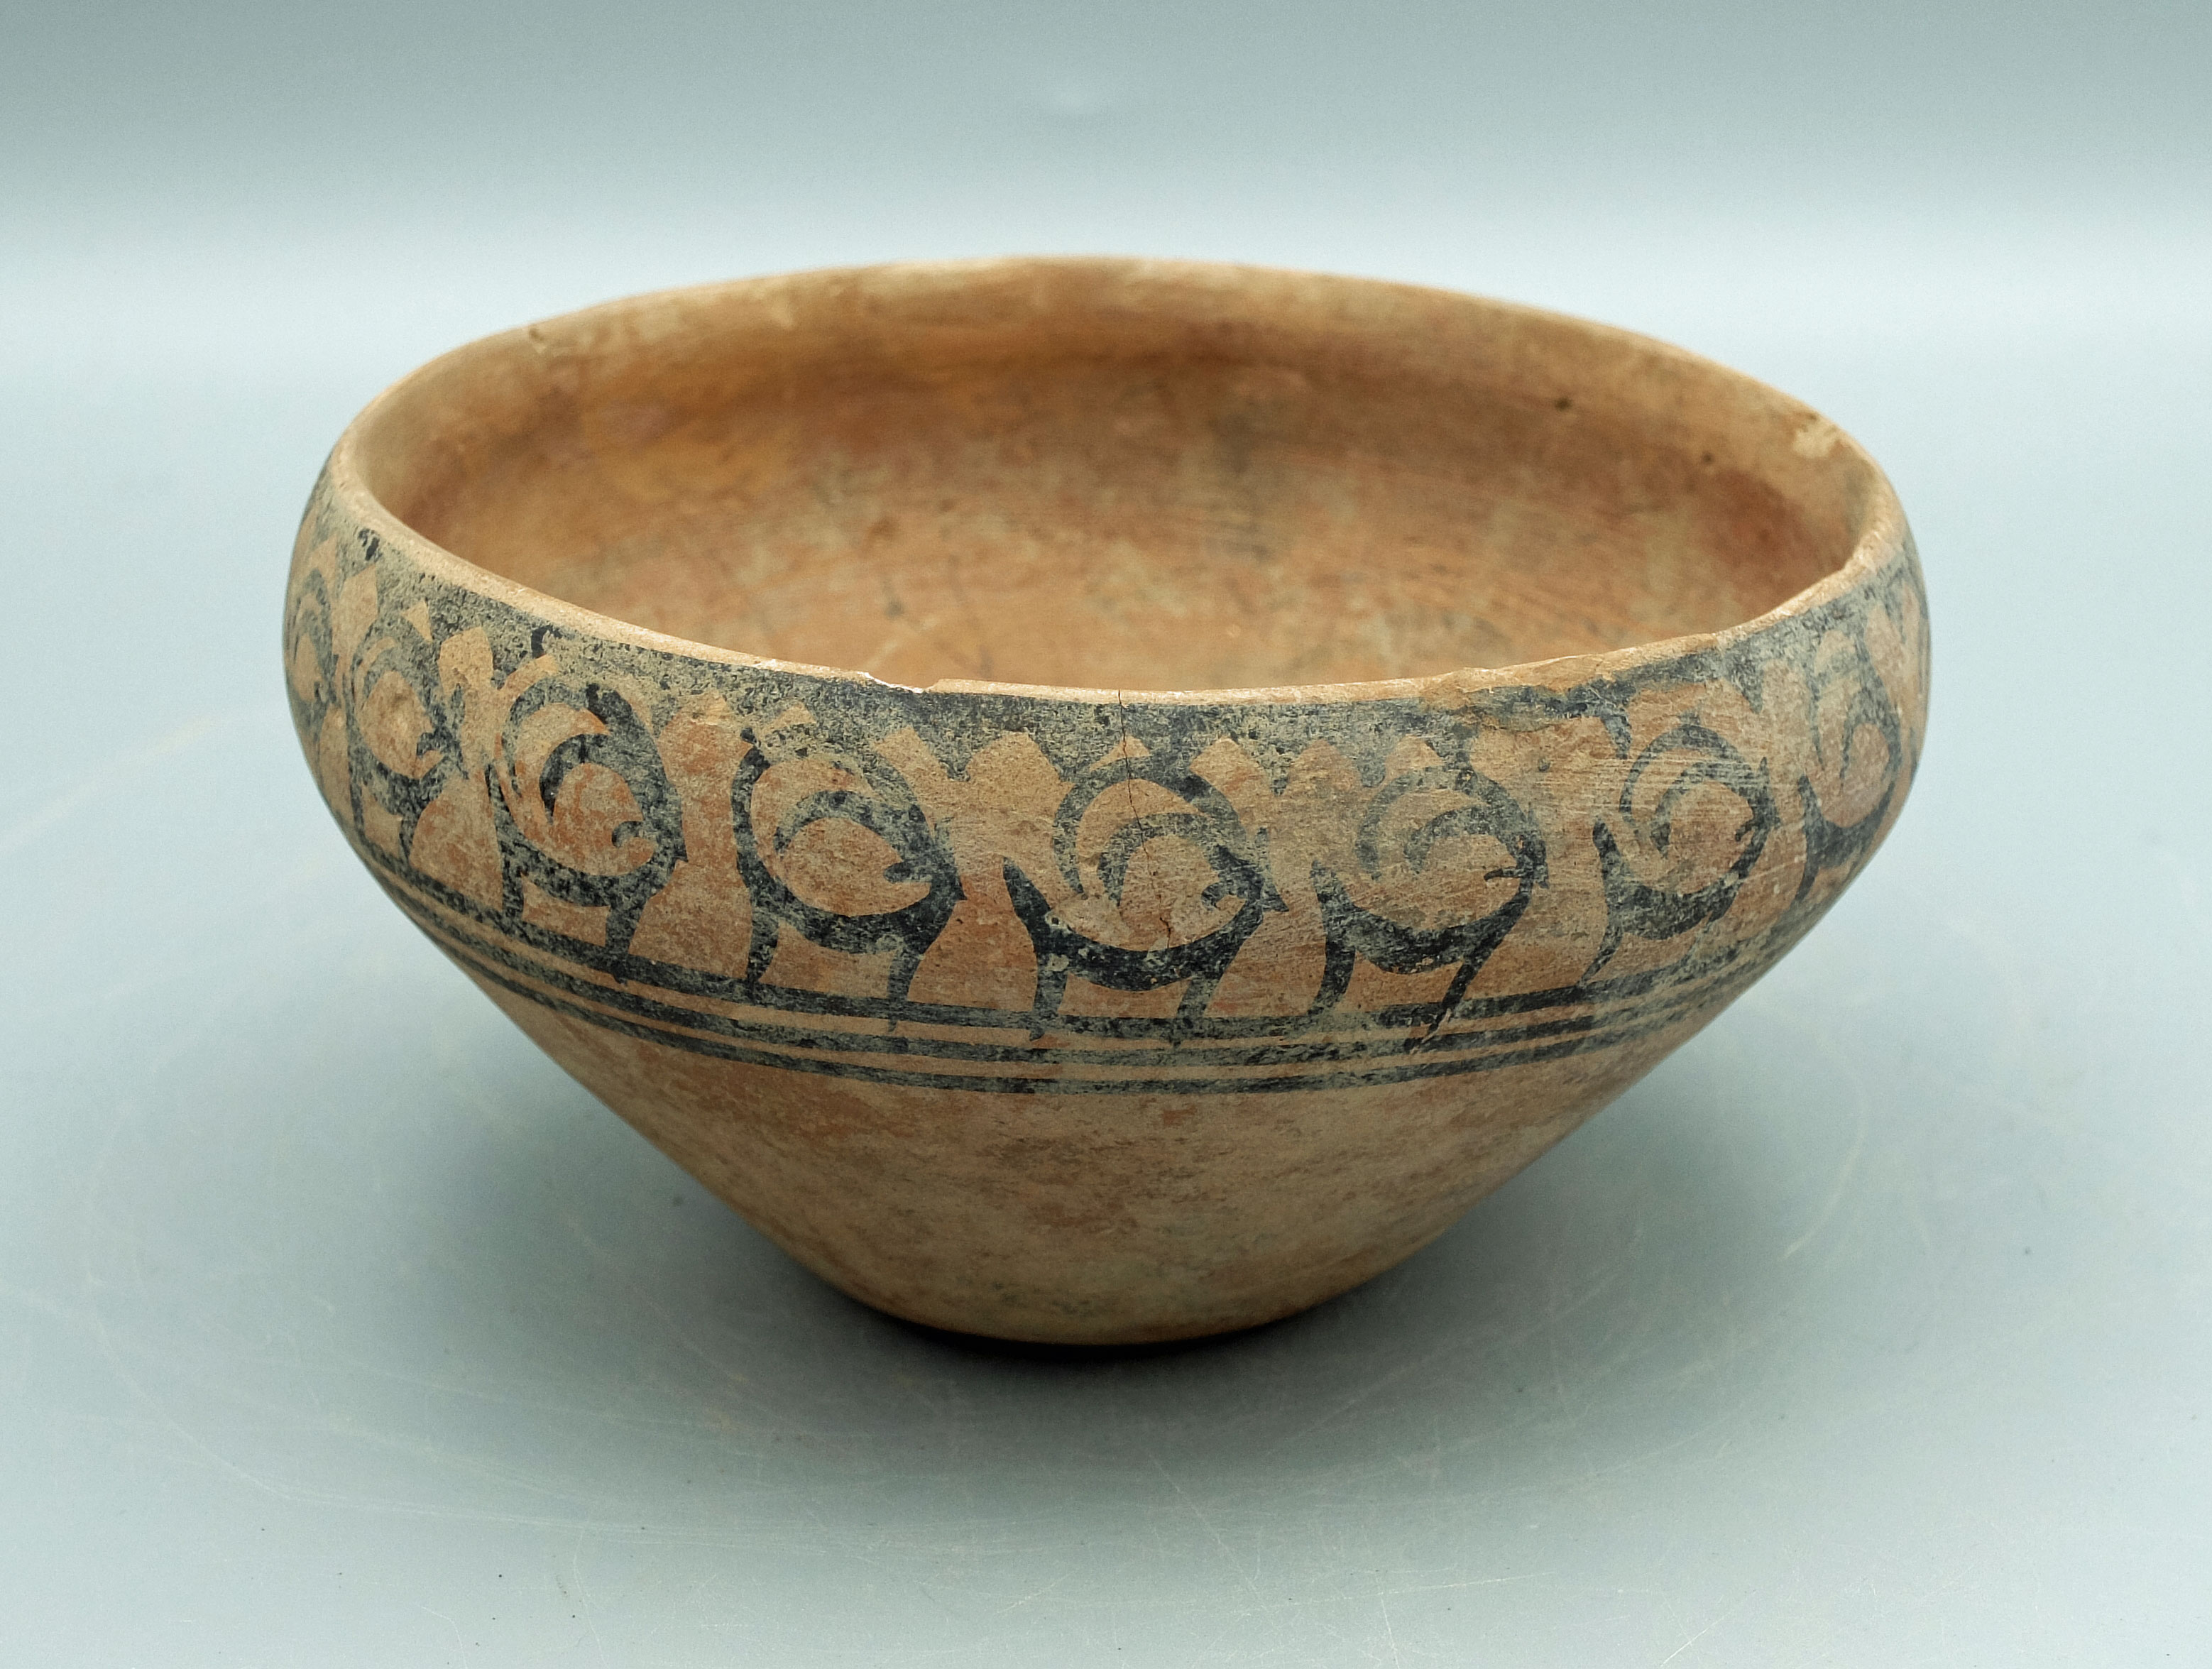 A lovely Harappan bowl from the Indus Valley, ca. 2500 - 1800 BC. This fine example is 5-7/8" in - Image 2 of 2